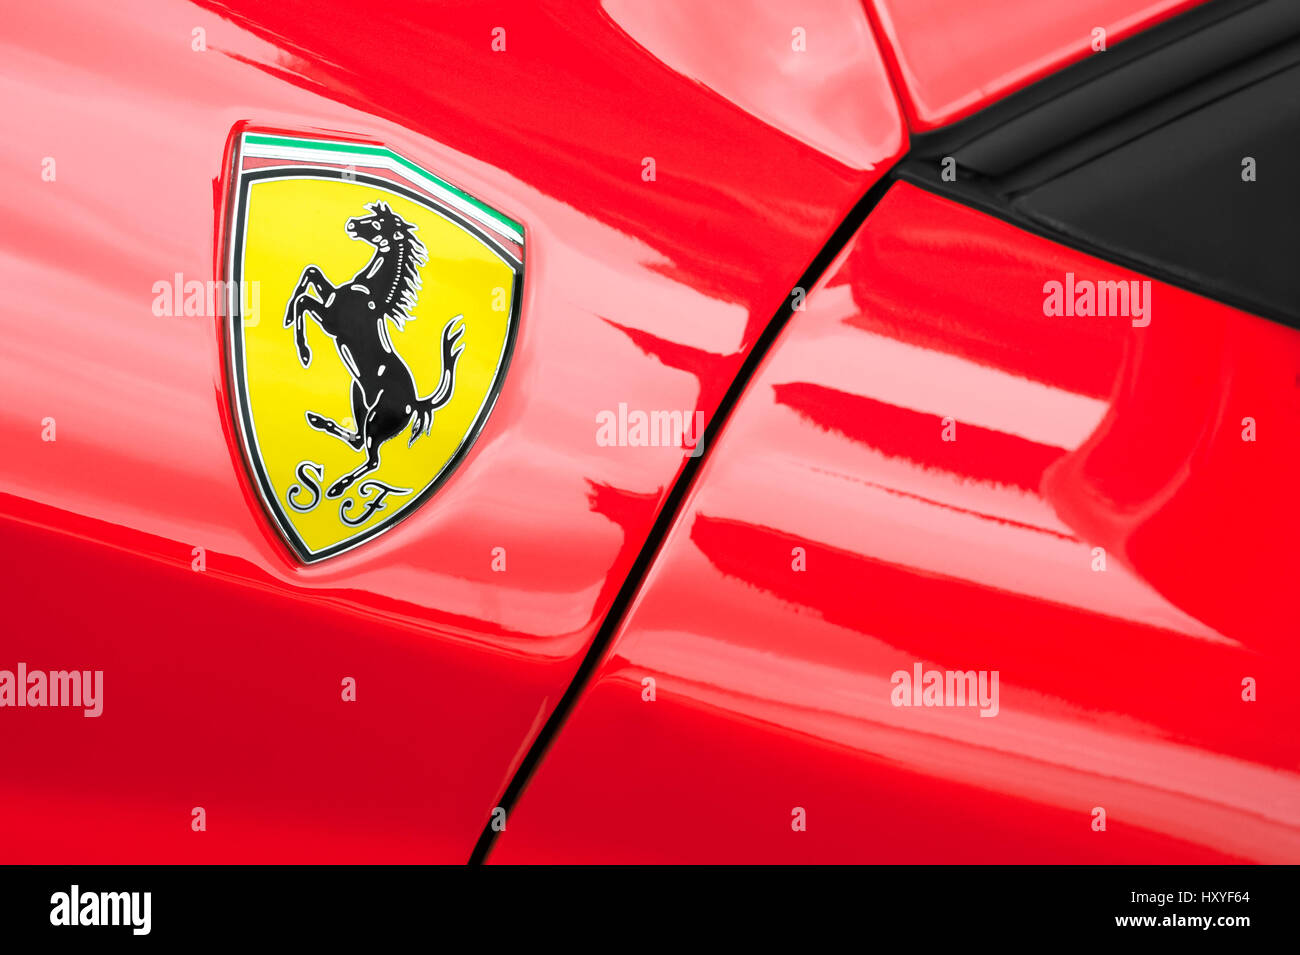 WINNERSH, UK - MAY 18: Ferrari sports-car badge closeup, part of a collection of classic and modern vehicles displayed for charity at Bearwood College Stock Photo